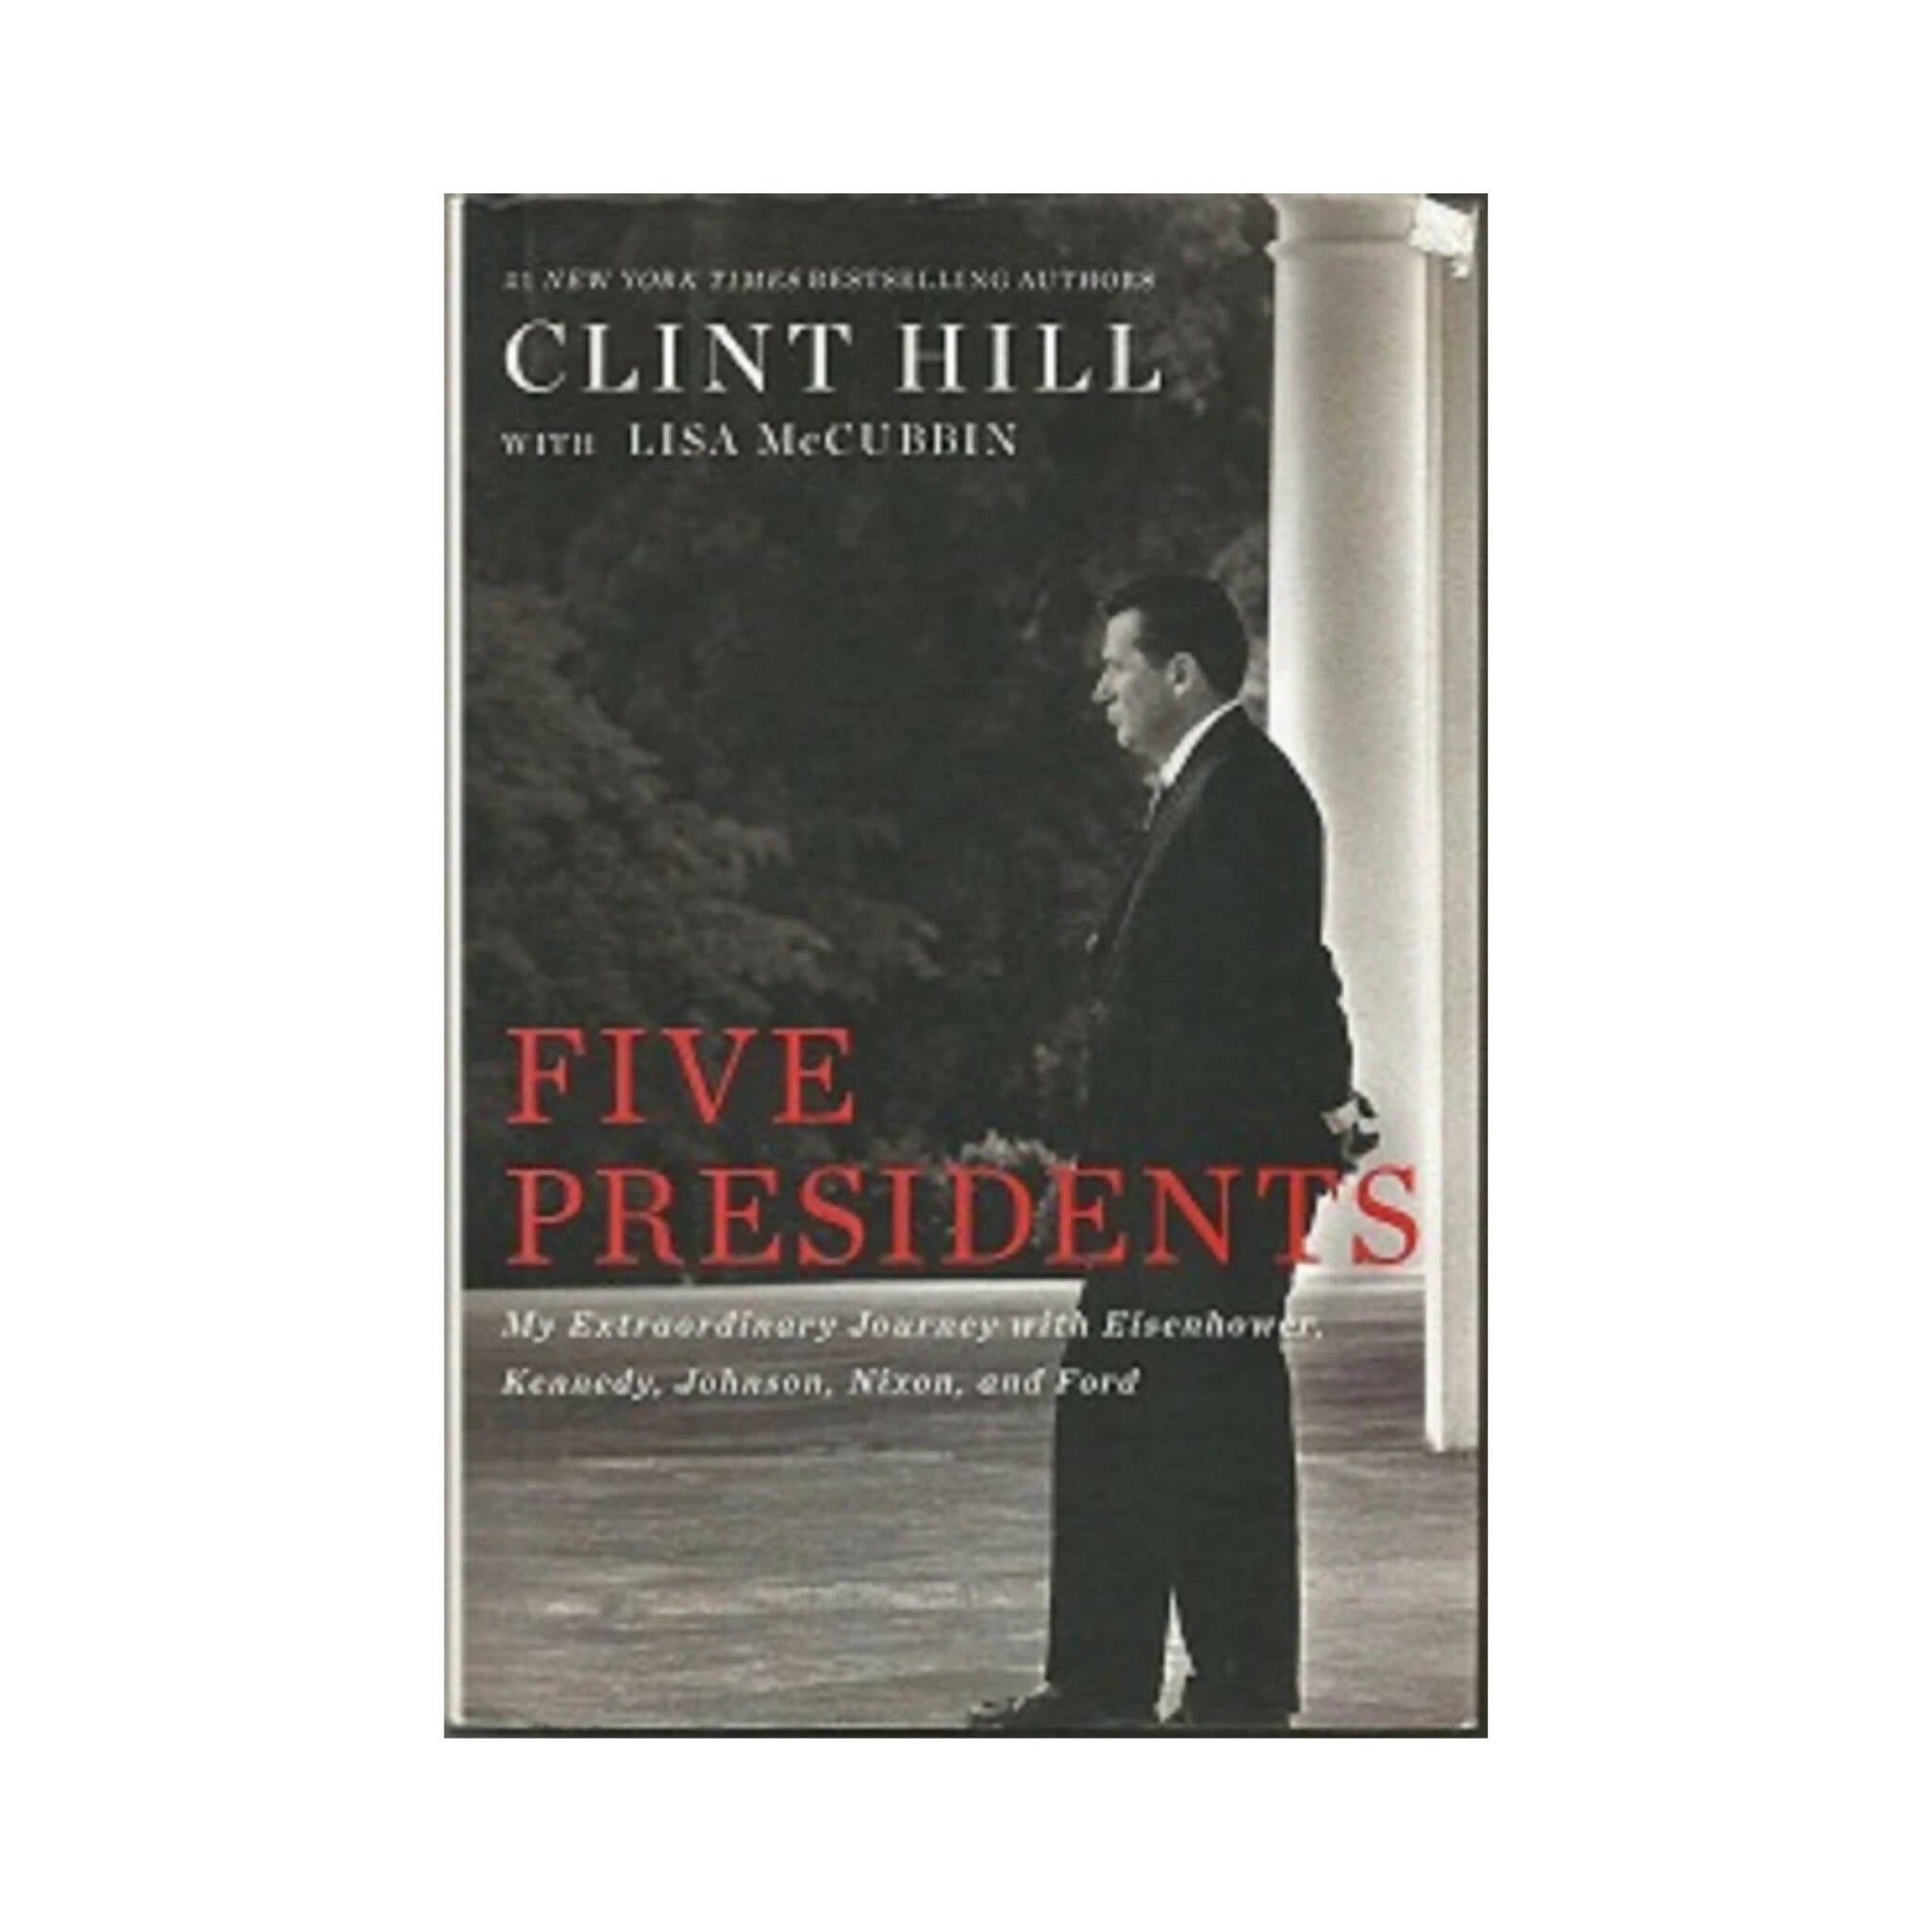 Book, Five Presidents, My Extraordinary Journey with Eisenhower, Kennedy, Johnson, Nixon, and Ford Hardcover